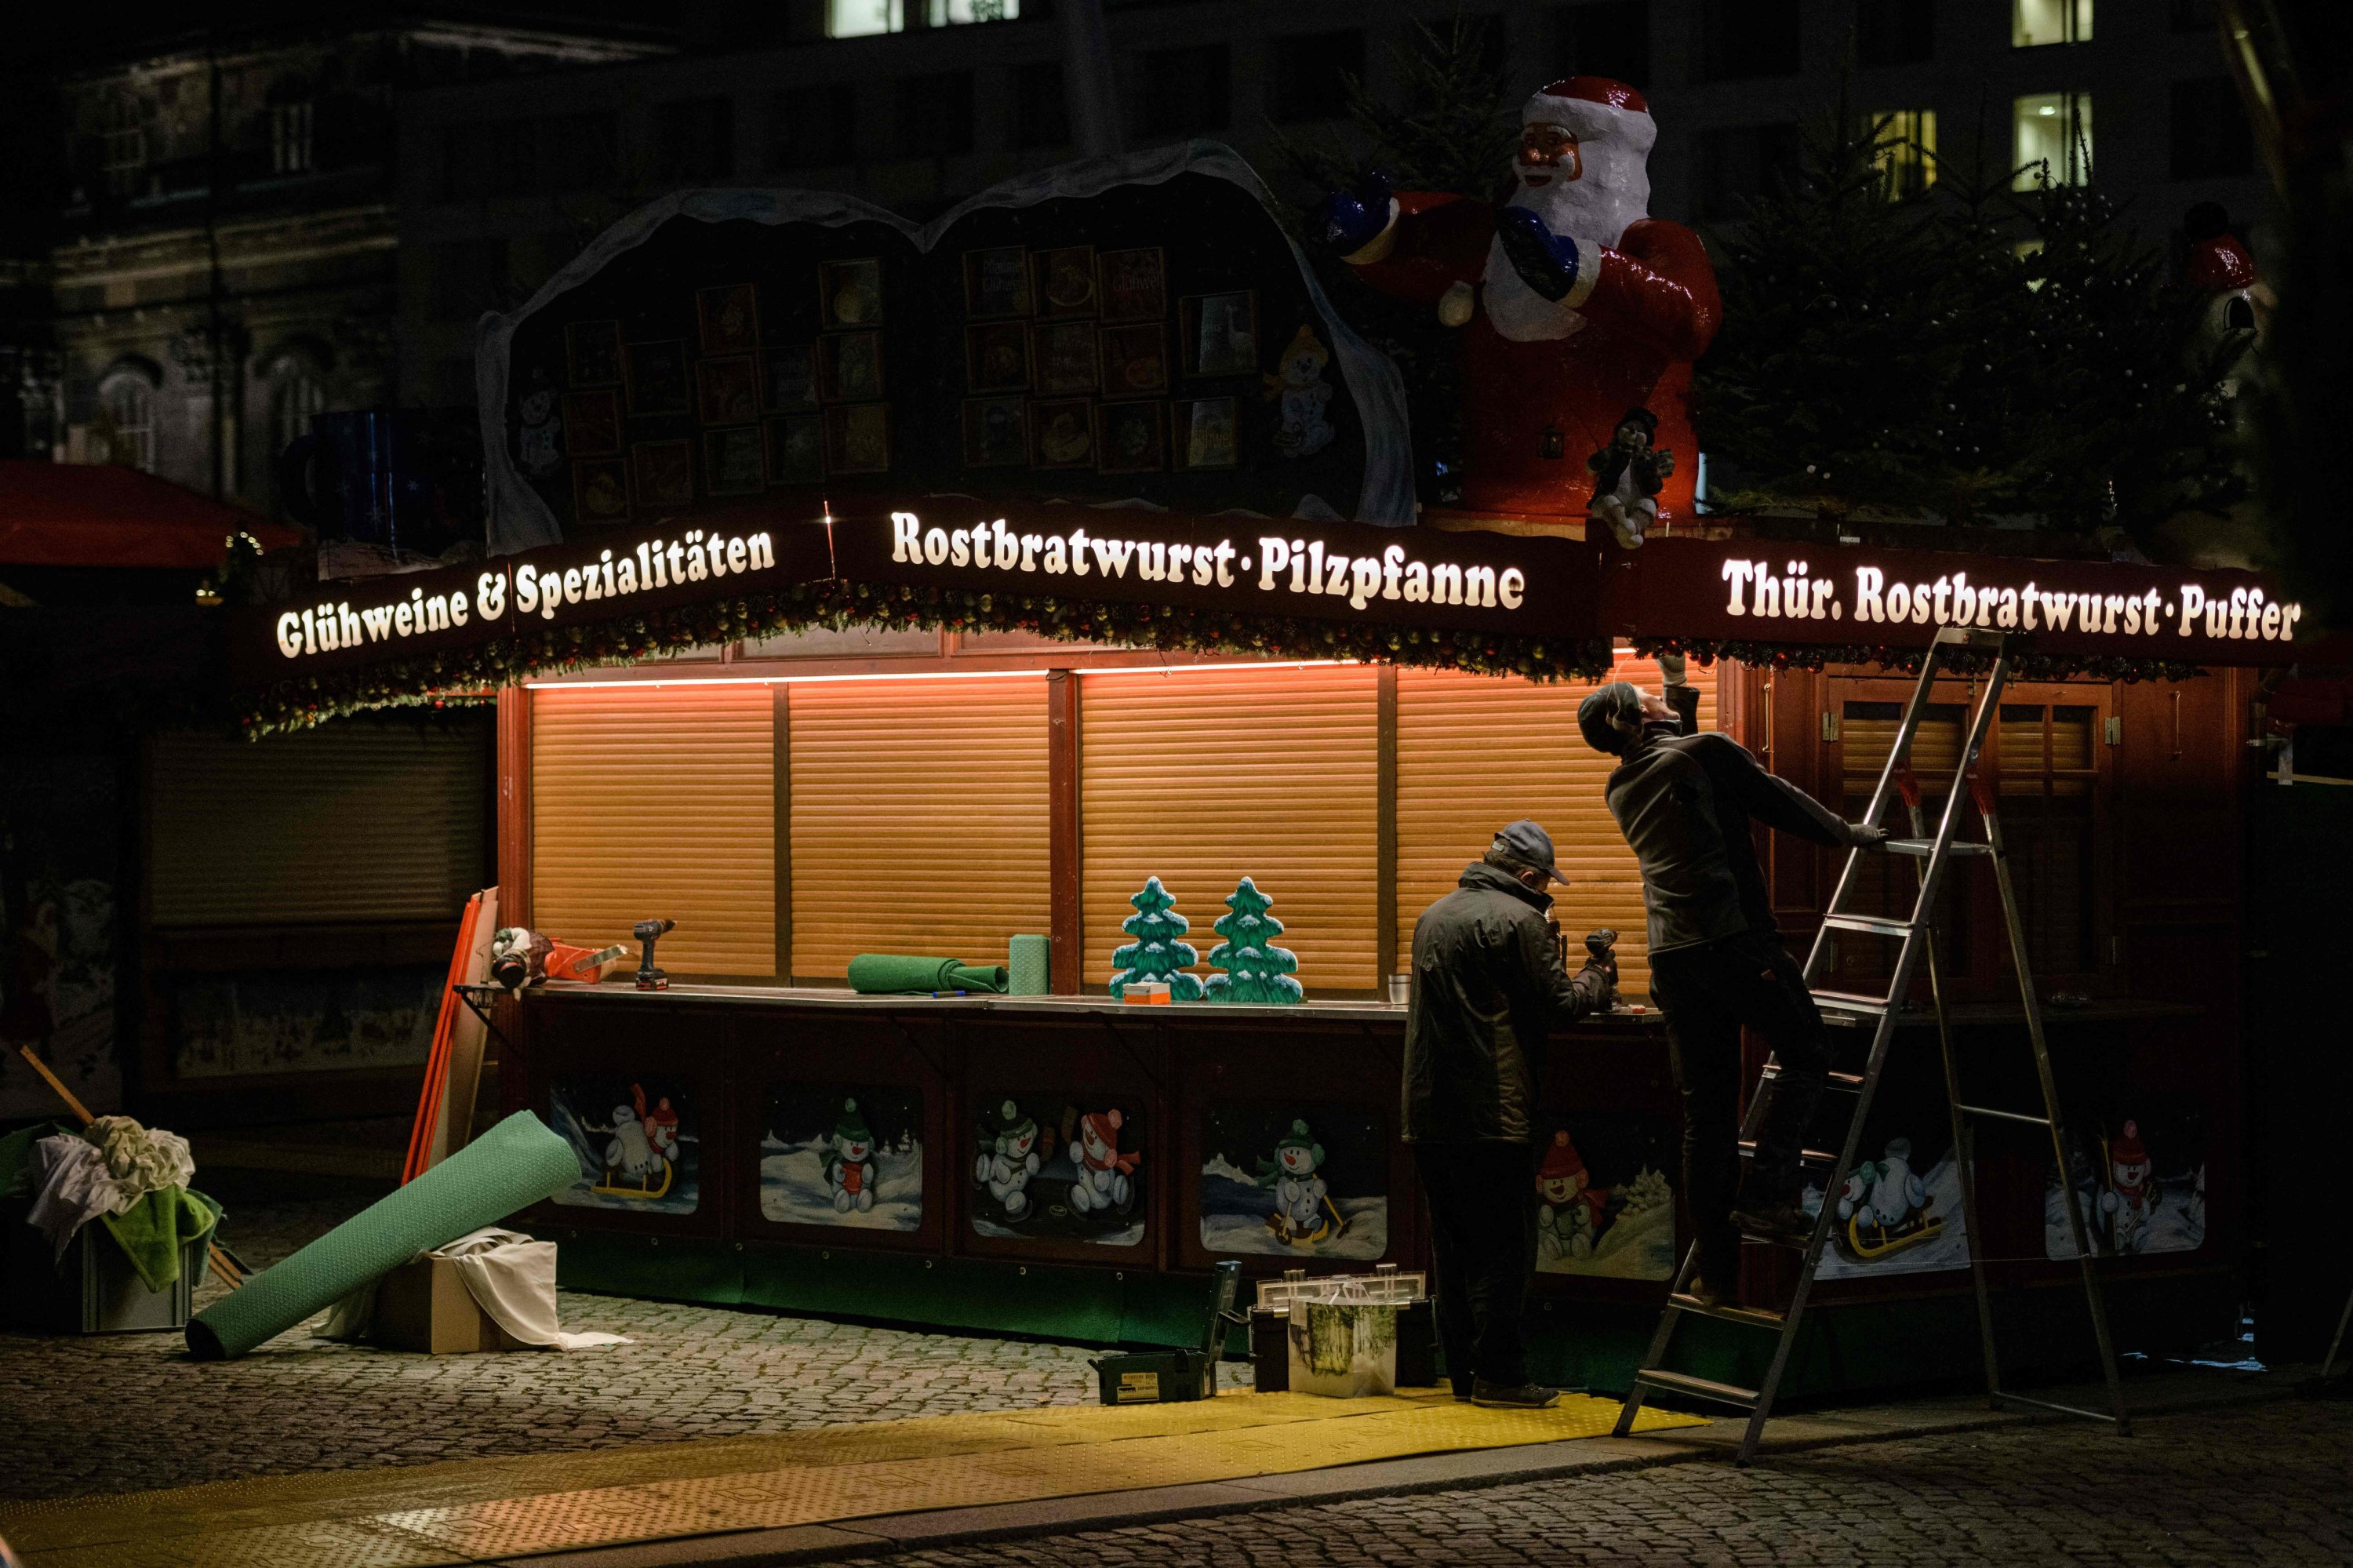 People work at a closed stall during the set-up at the Dresdner Striezelmarkt Christmas market in Dresden, eastern Germany, Nov. 15, 2021. (AFP Photo)